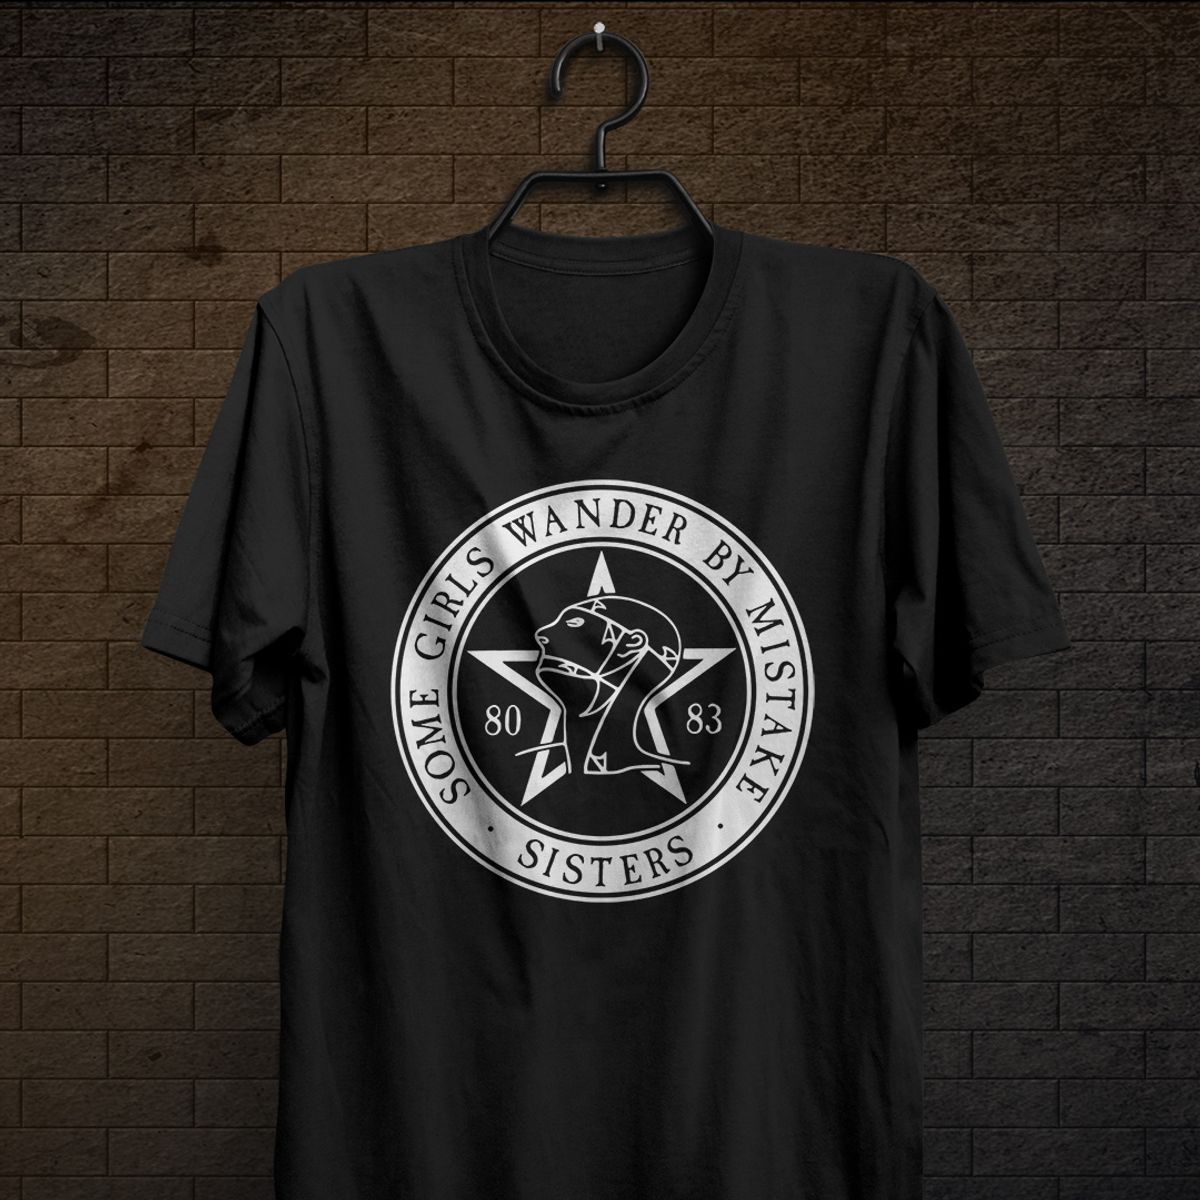 Nome do produto: Camiseta The Sisters Of Mercy - Some Girls Wander By Mistake